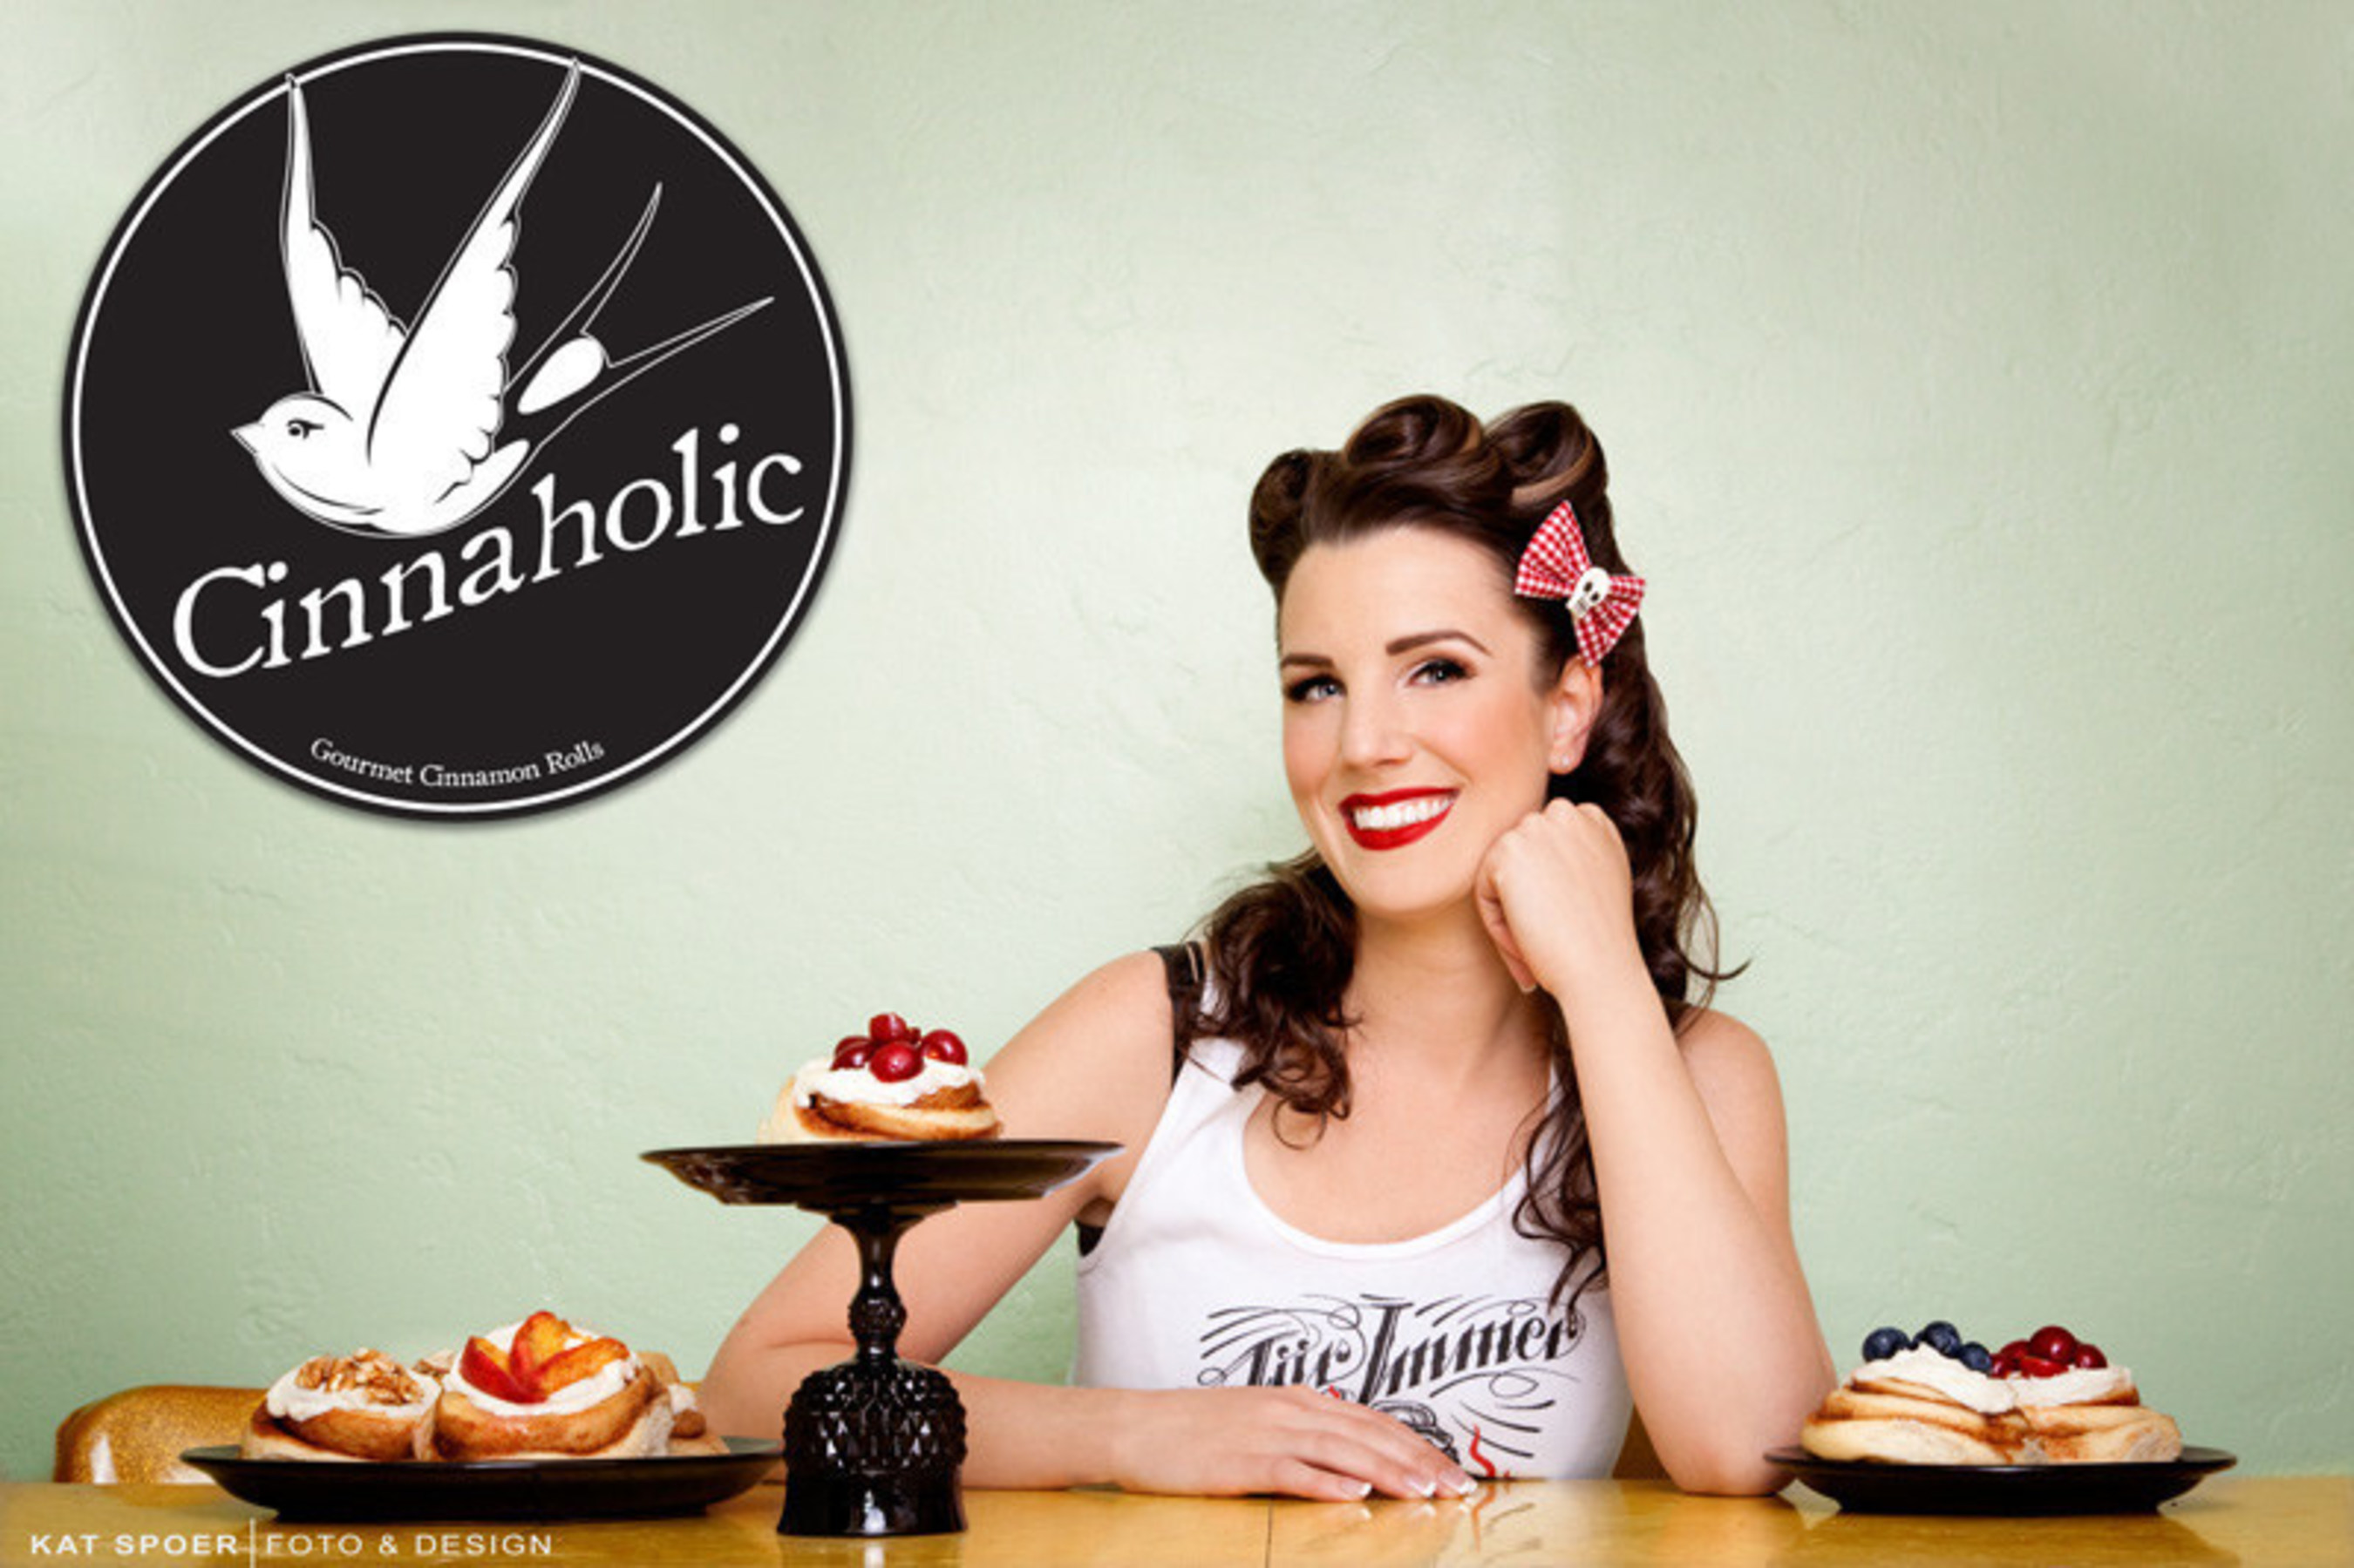 Shannon Radke created Cinnaholic in Berkeley California and has won several awards before getting international attention. The all vegan, gourmet cinnamon roll bakery offers over 30 different frosting flavors and a variety of different toppings.